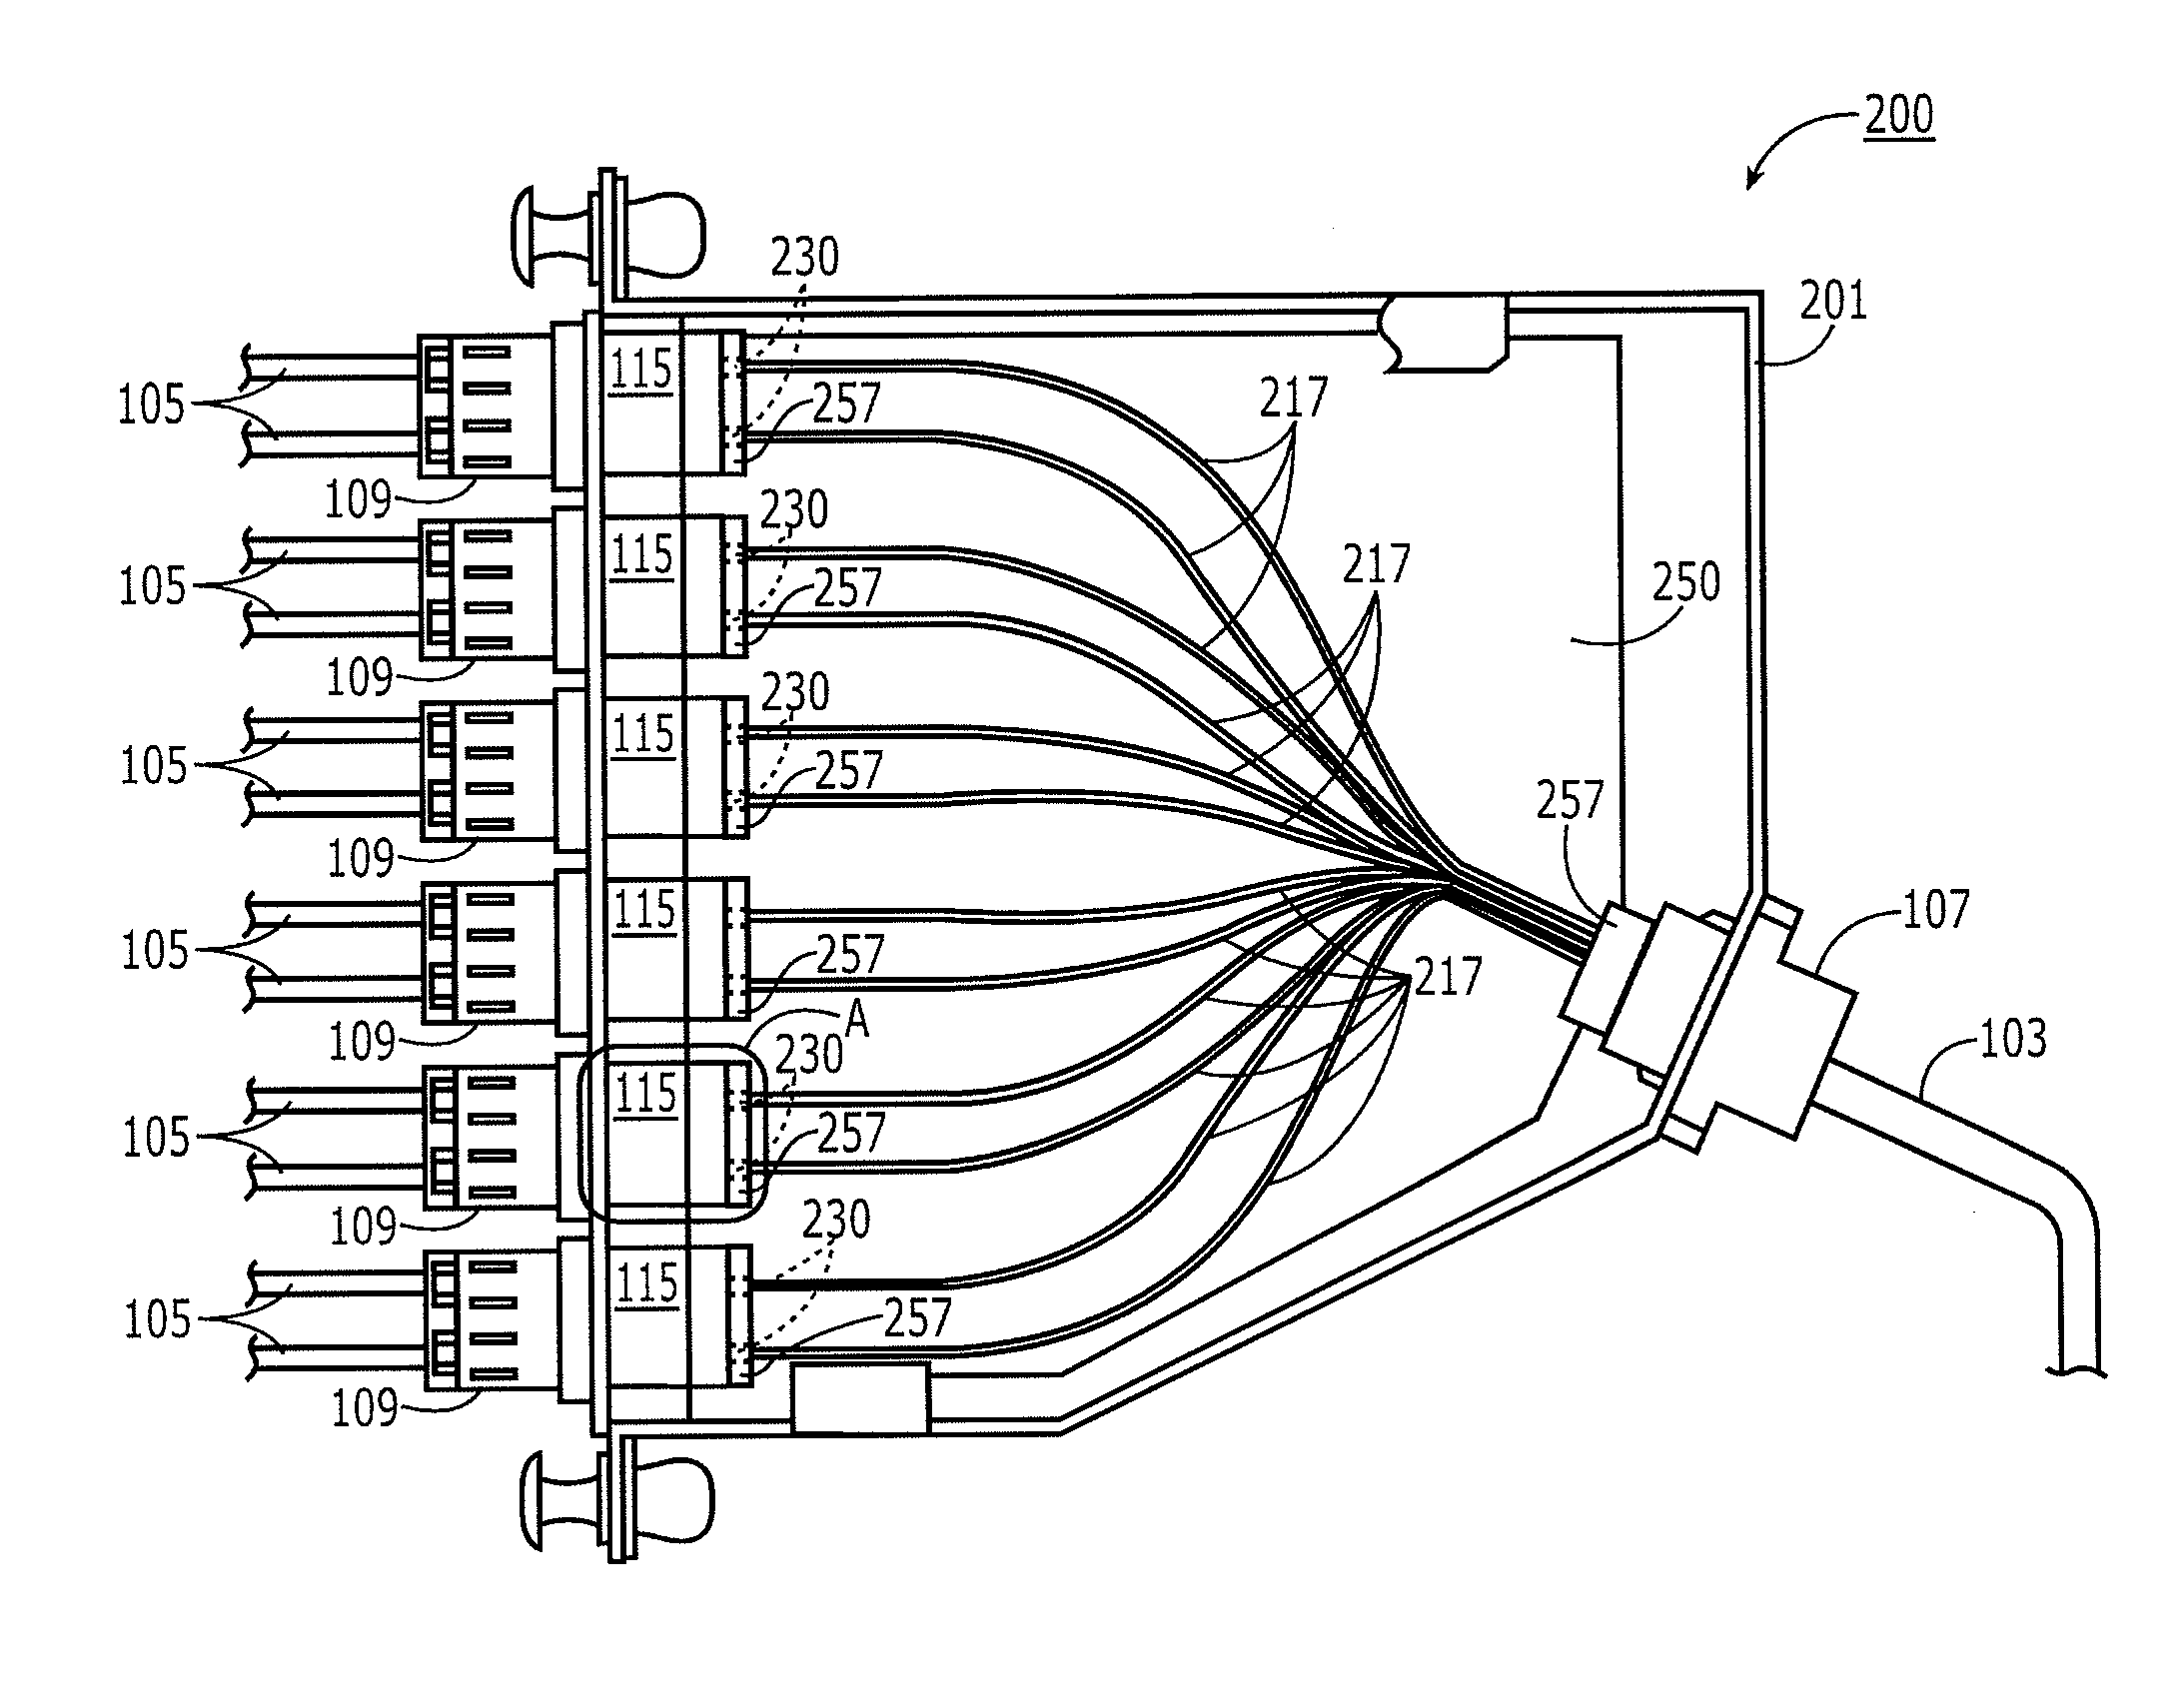 Flexible lensed optical interconnect device for signal distribution